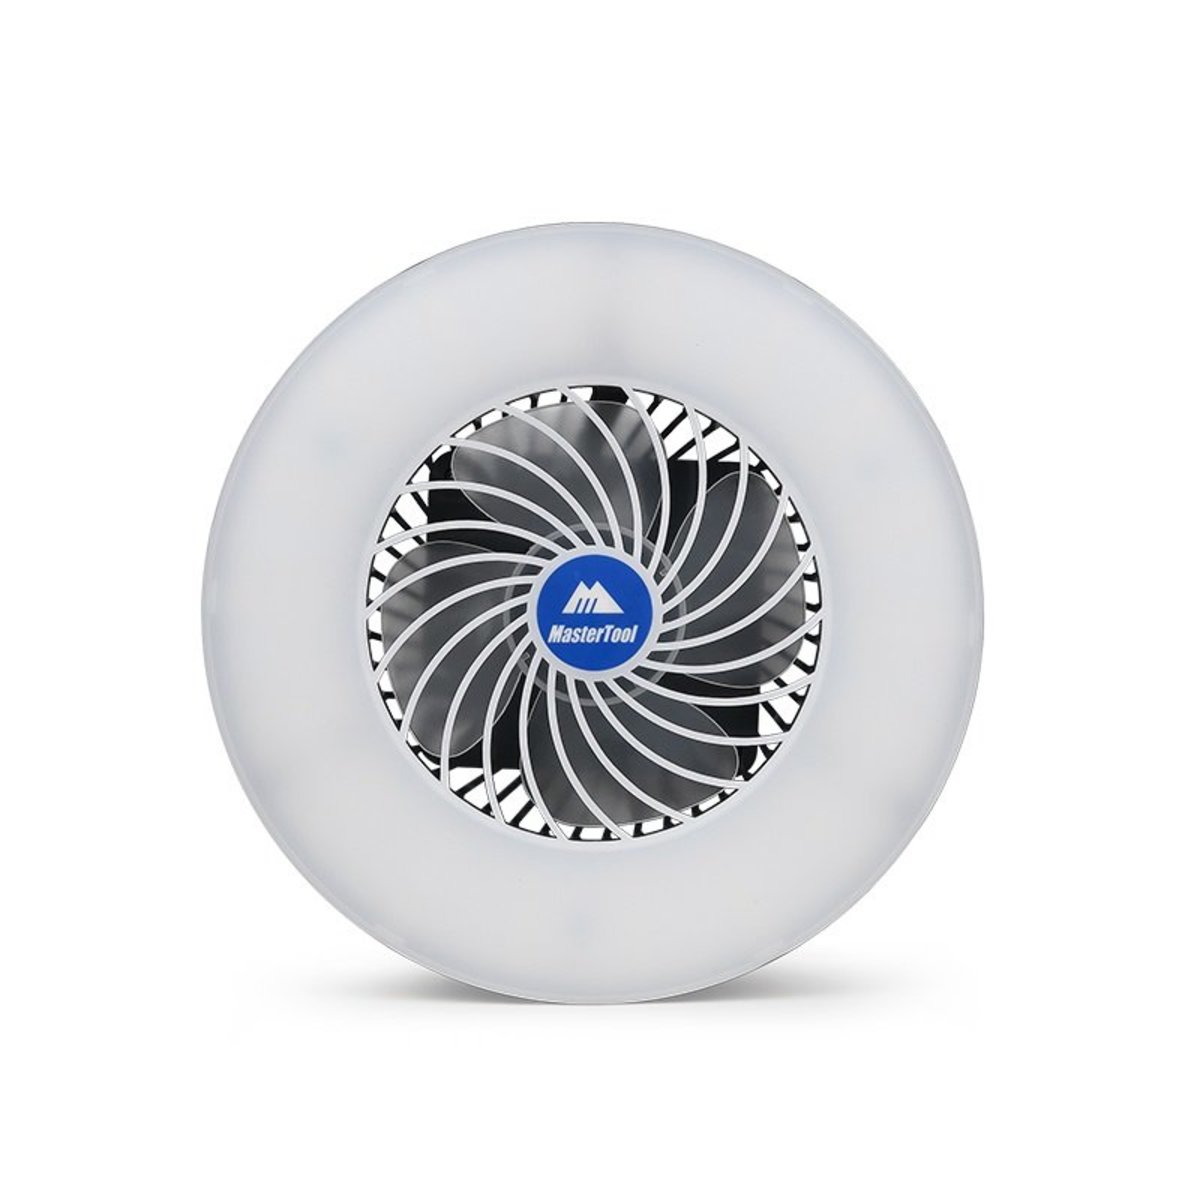 MasterTool - white，Coolight - USB Rechargable Cooling Fan with Lantern Light